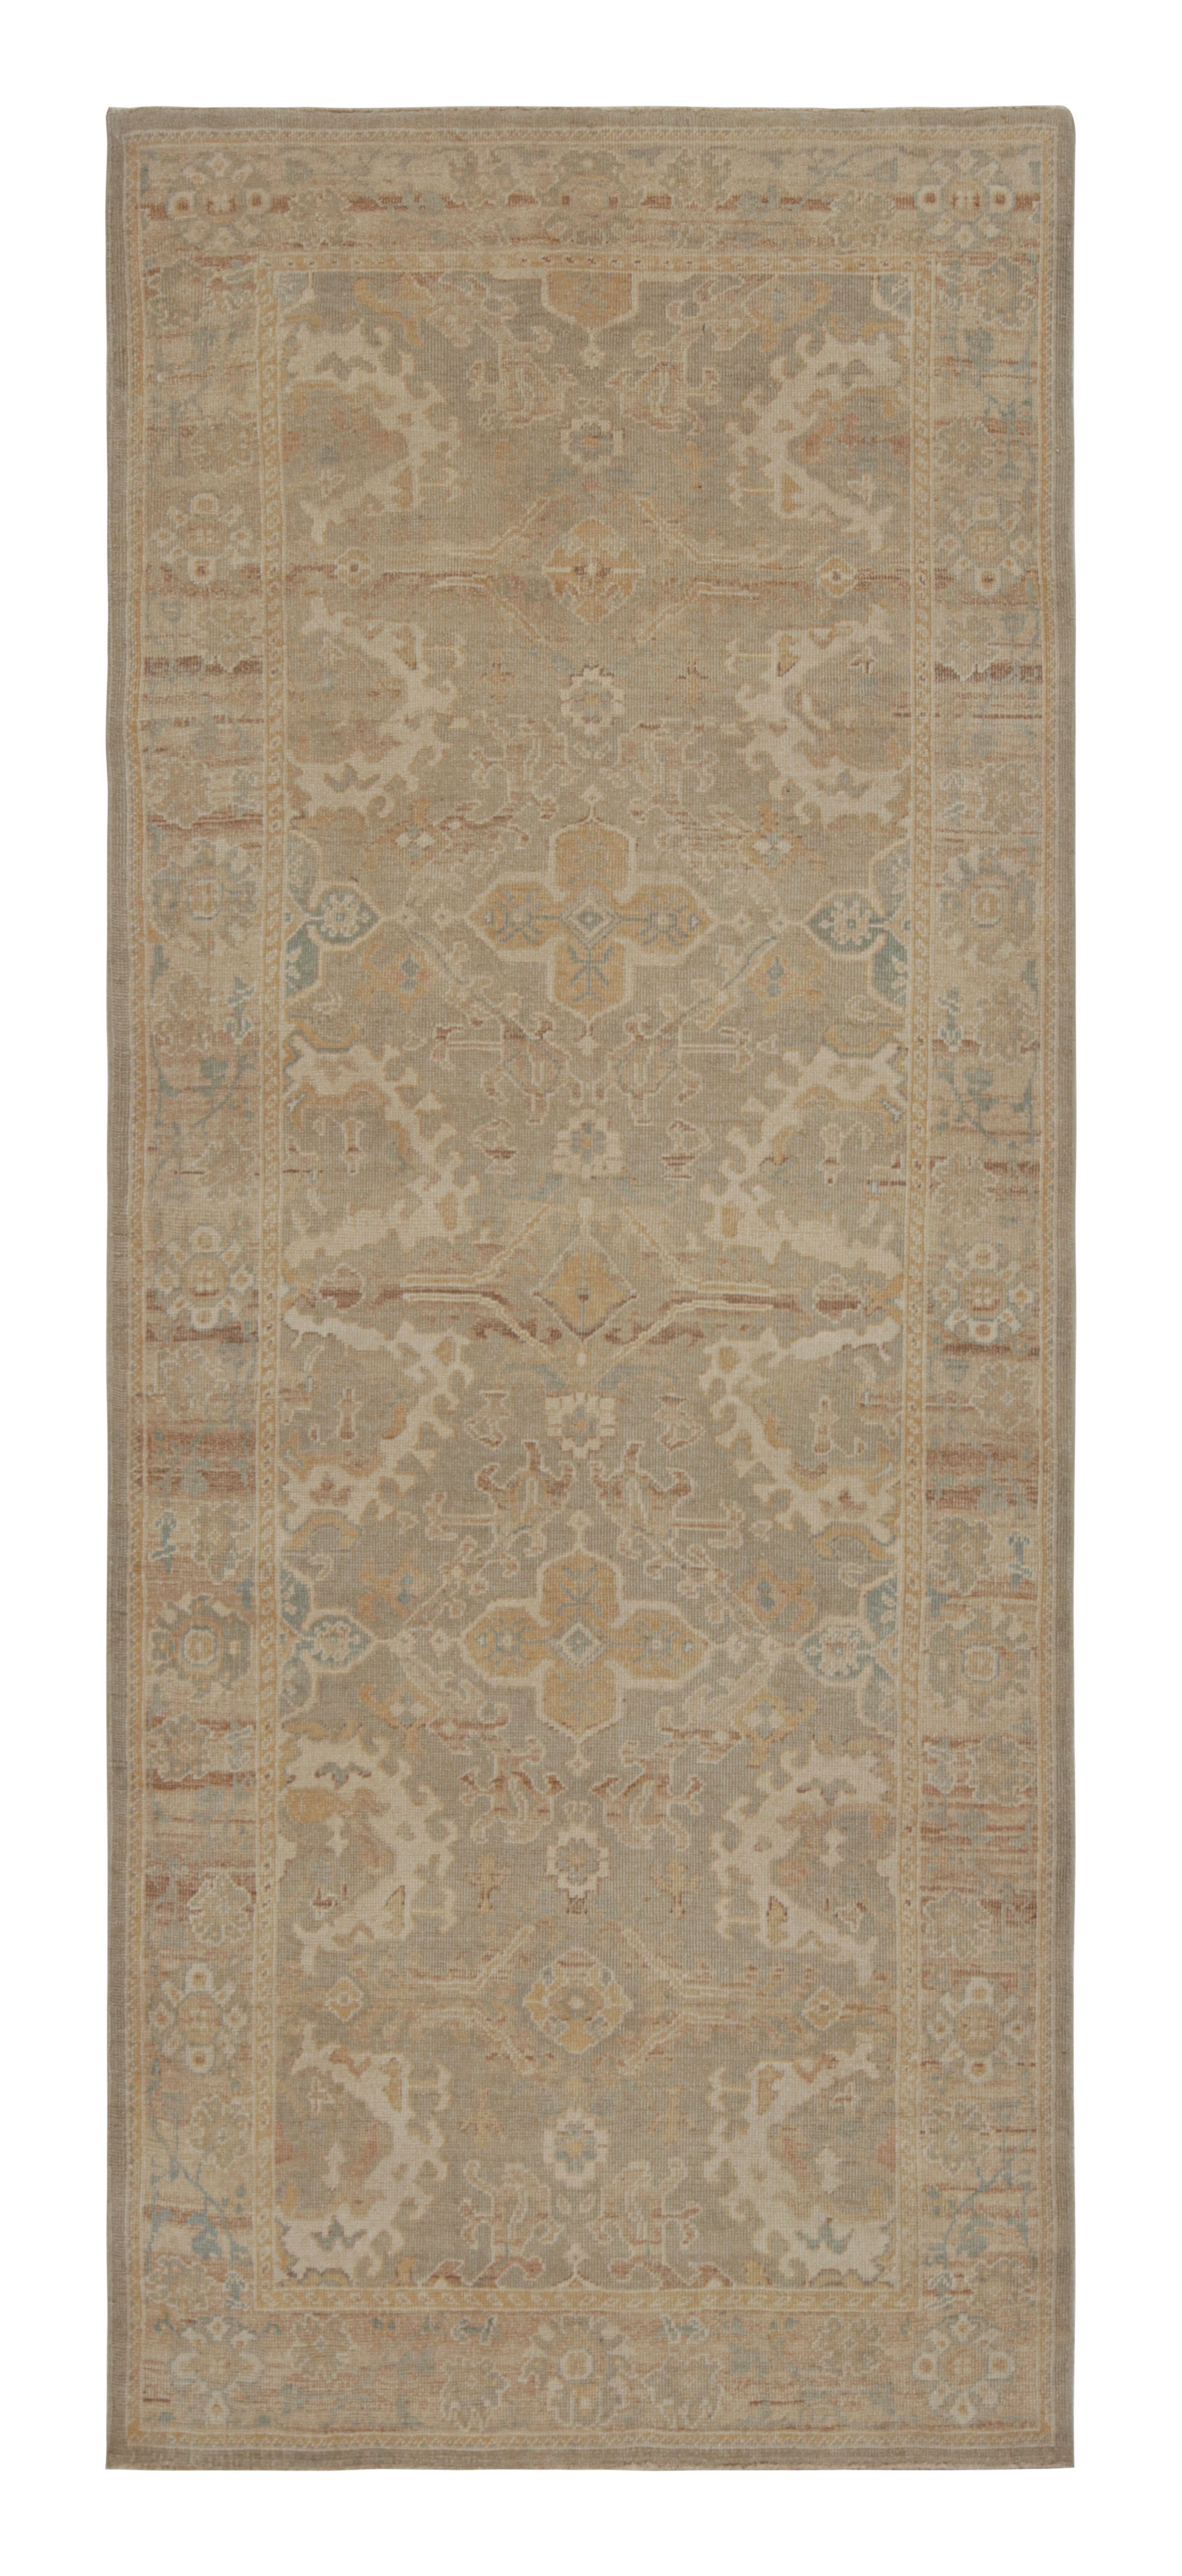 Rug & Kilim’s Khotan Style Rug in an All over Beige-Brown Floral Pattern For Sale